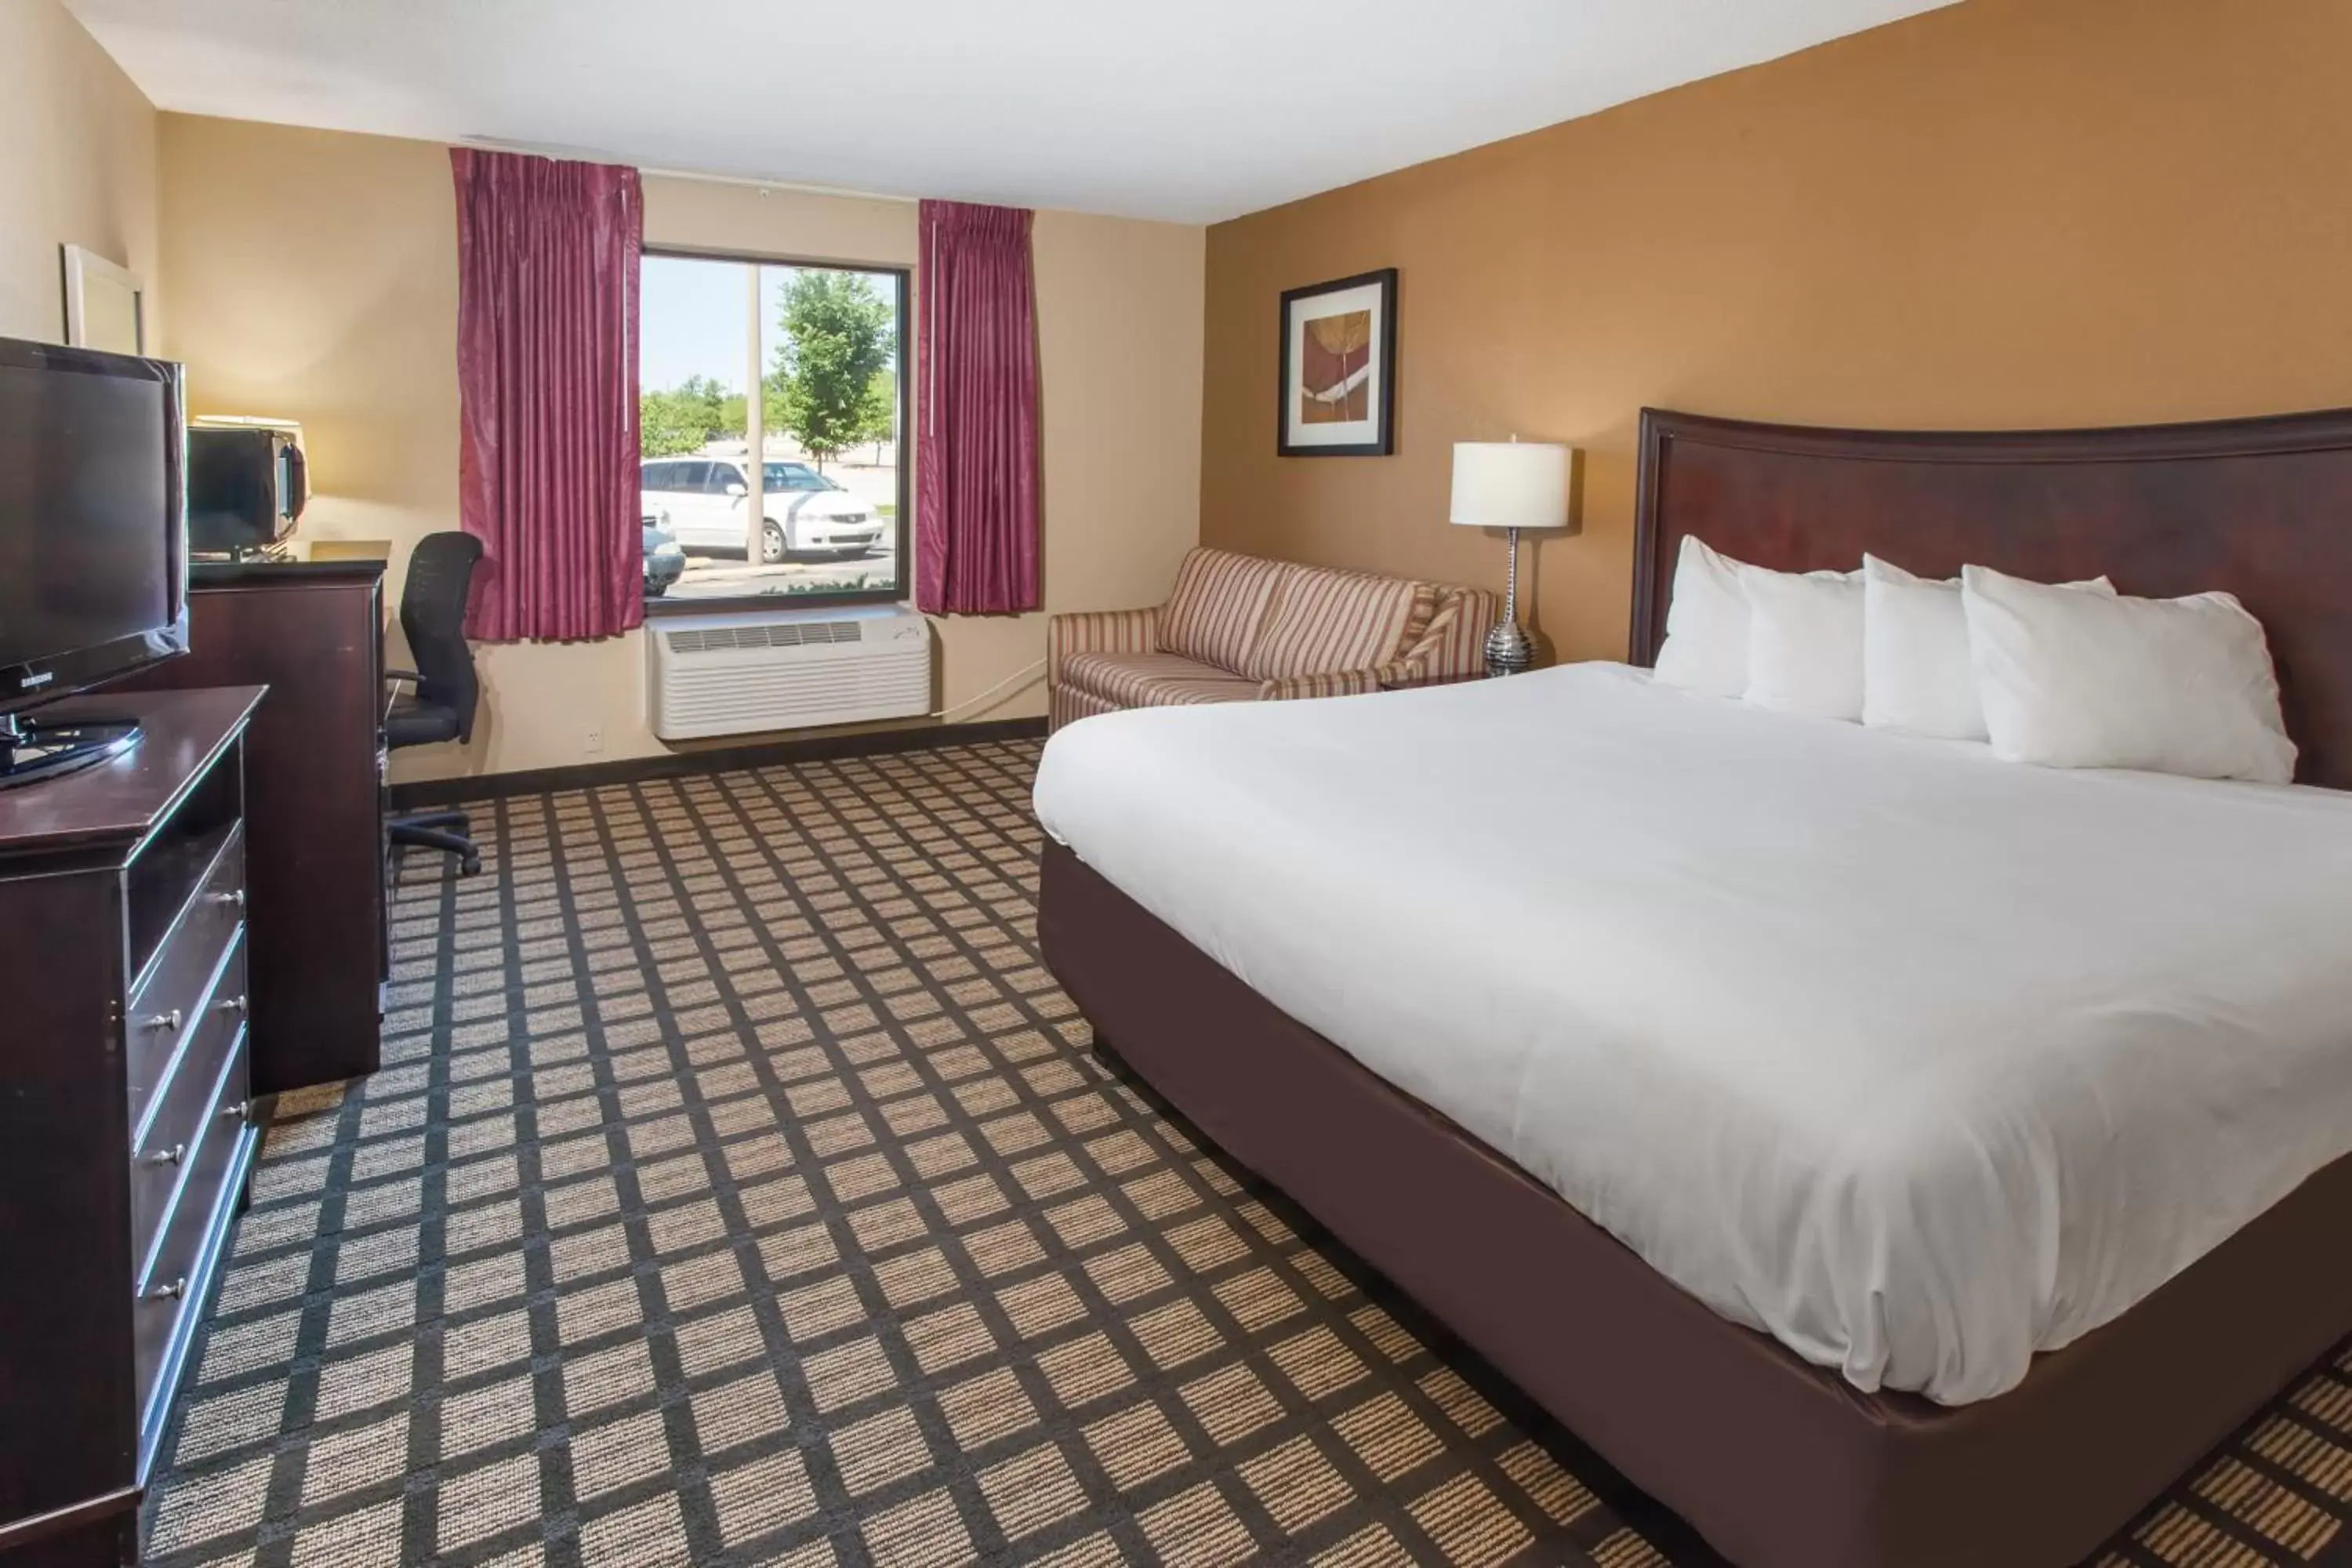 Bed in Rodeway Inn Bloomington - Normal near I-55 and University